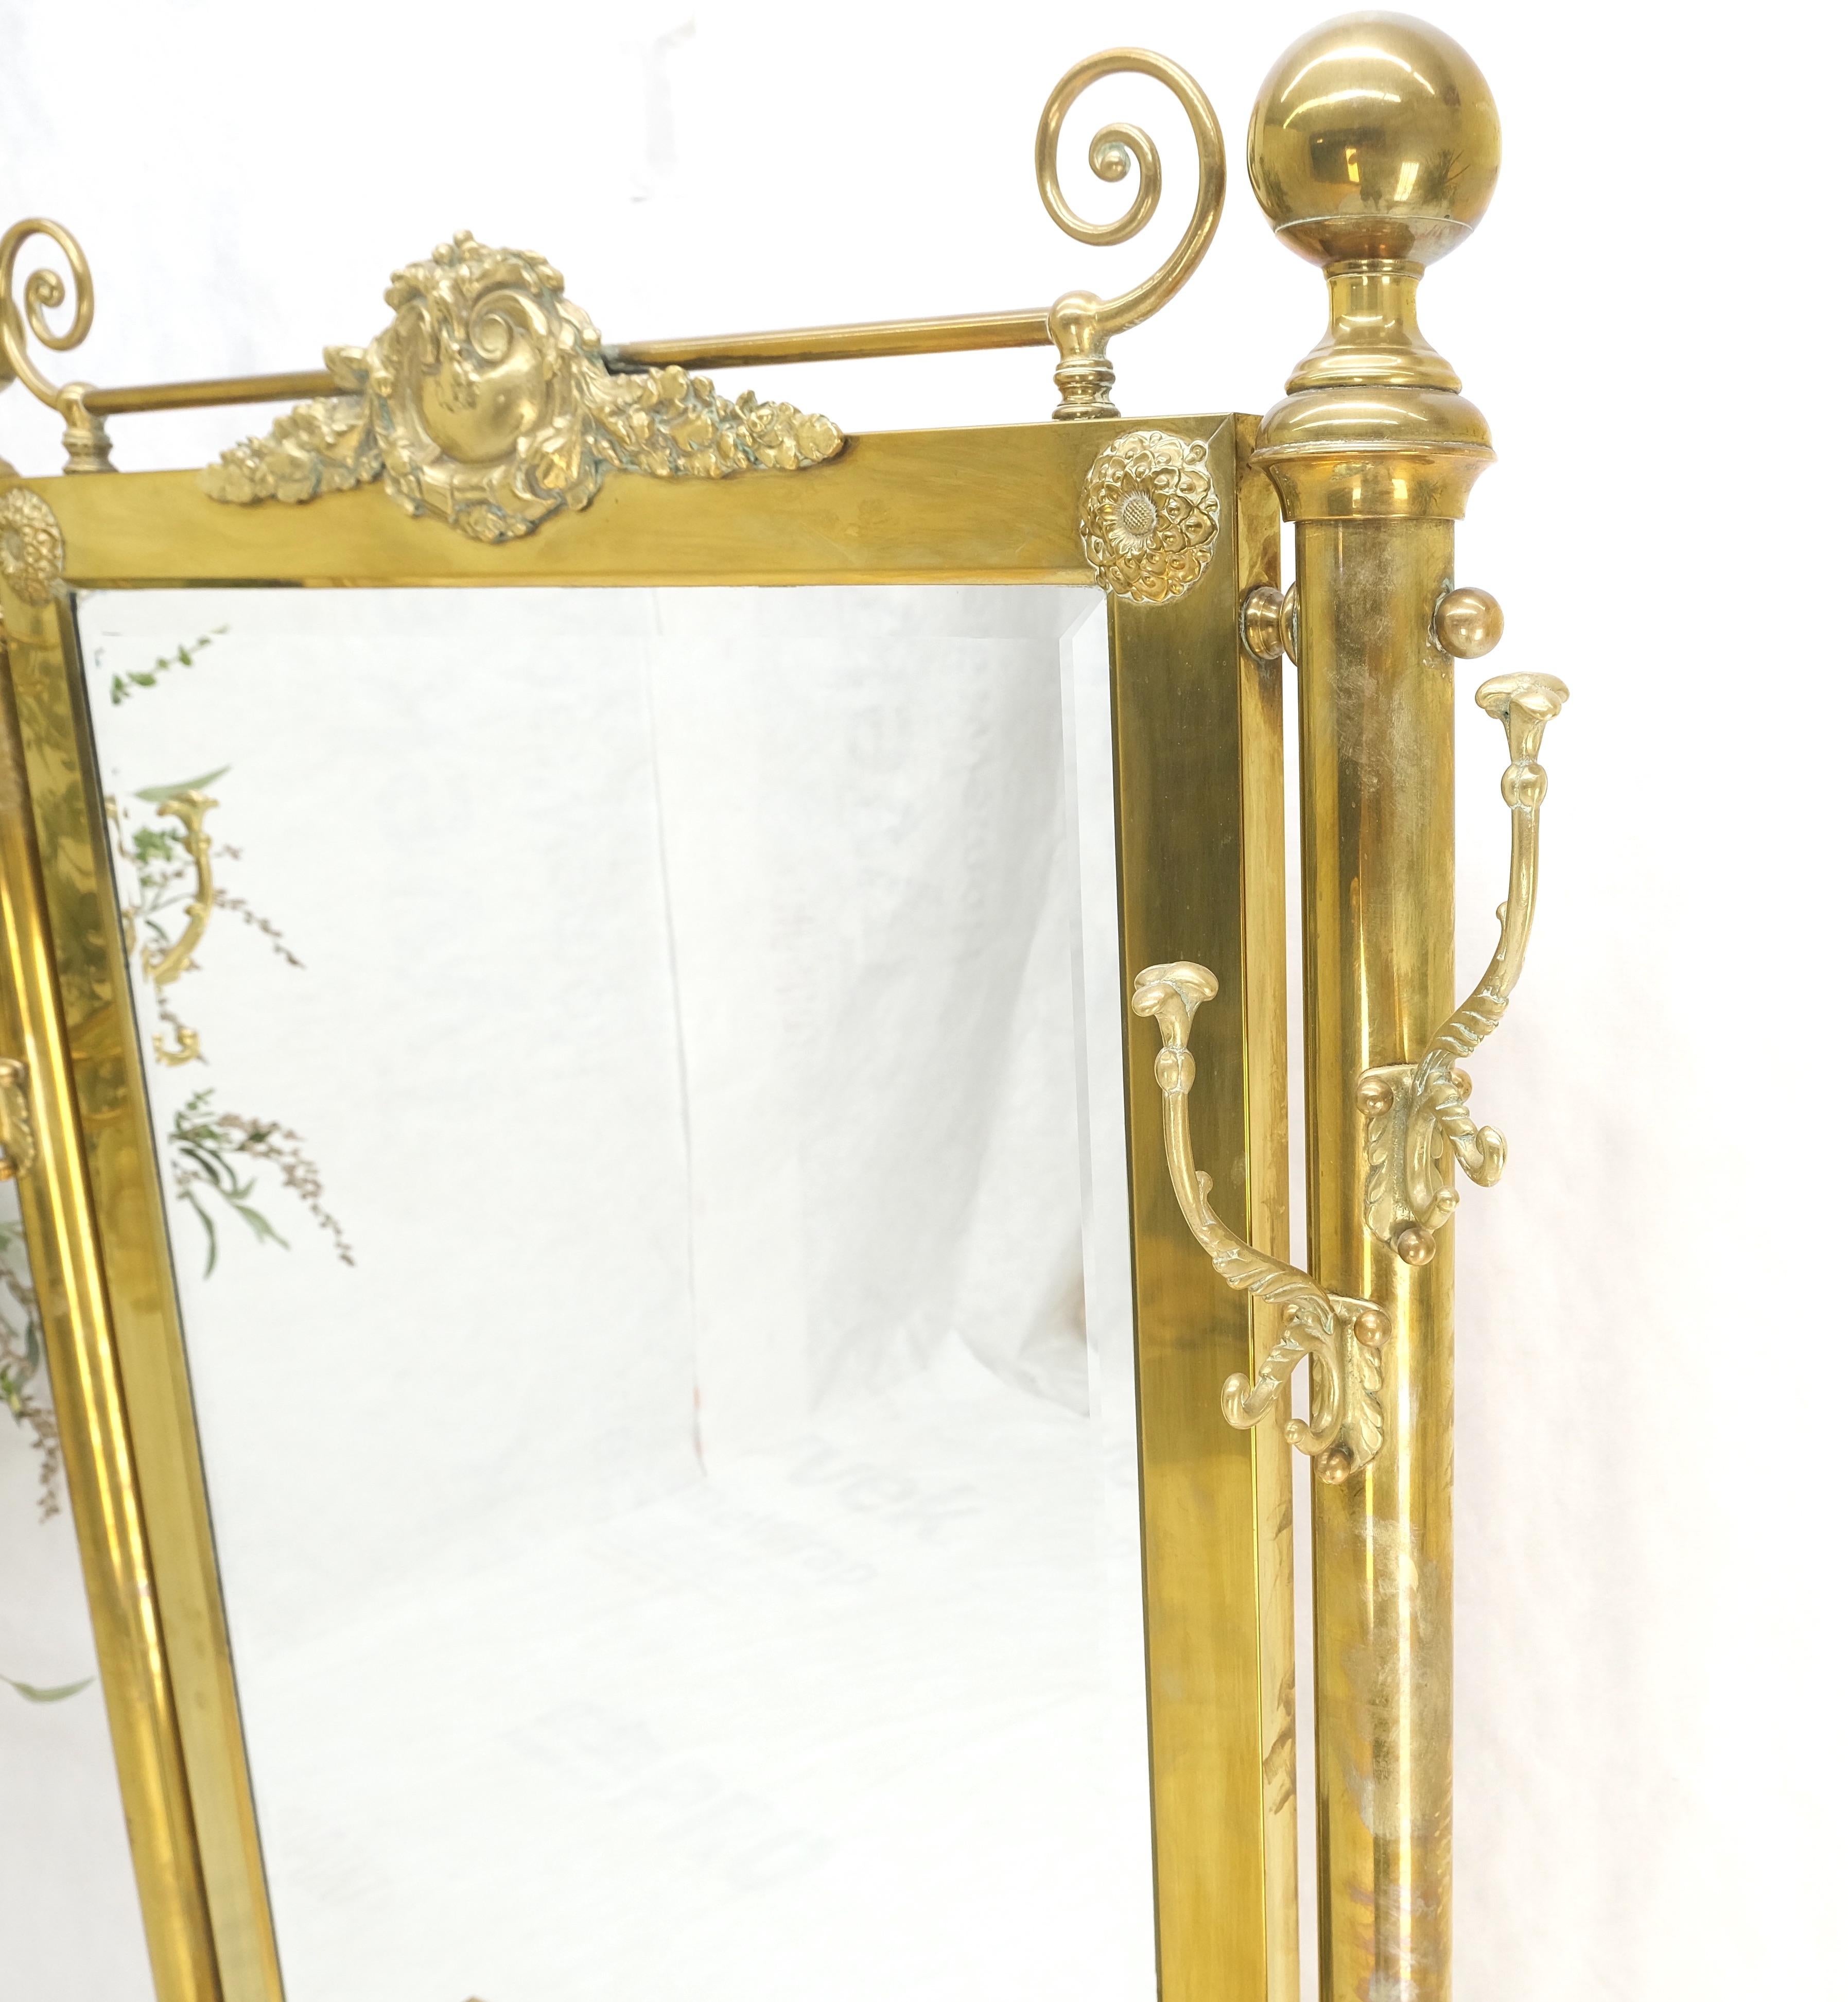 Solid Brass Entryway Hall Tree Mirror Coat Rack Console Table Claw Feet In Good Condition For Sale In Rockaway, NJ